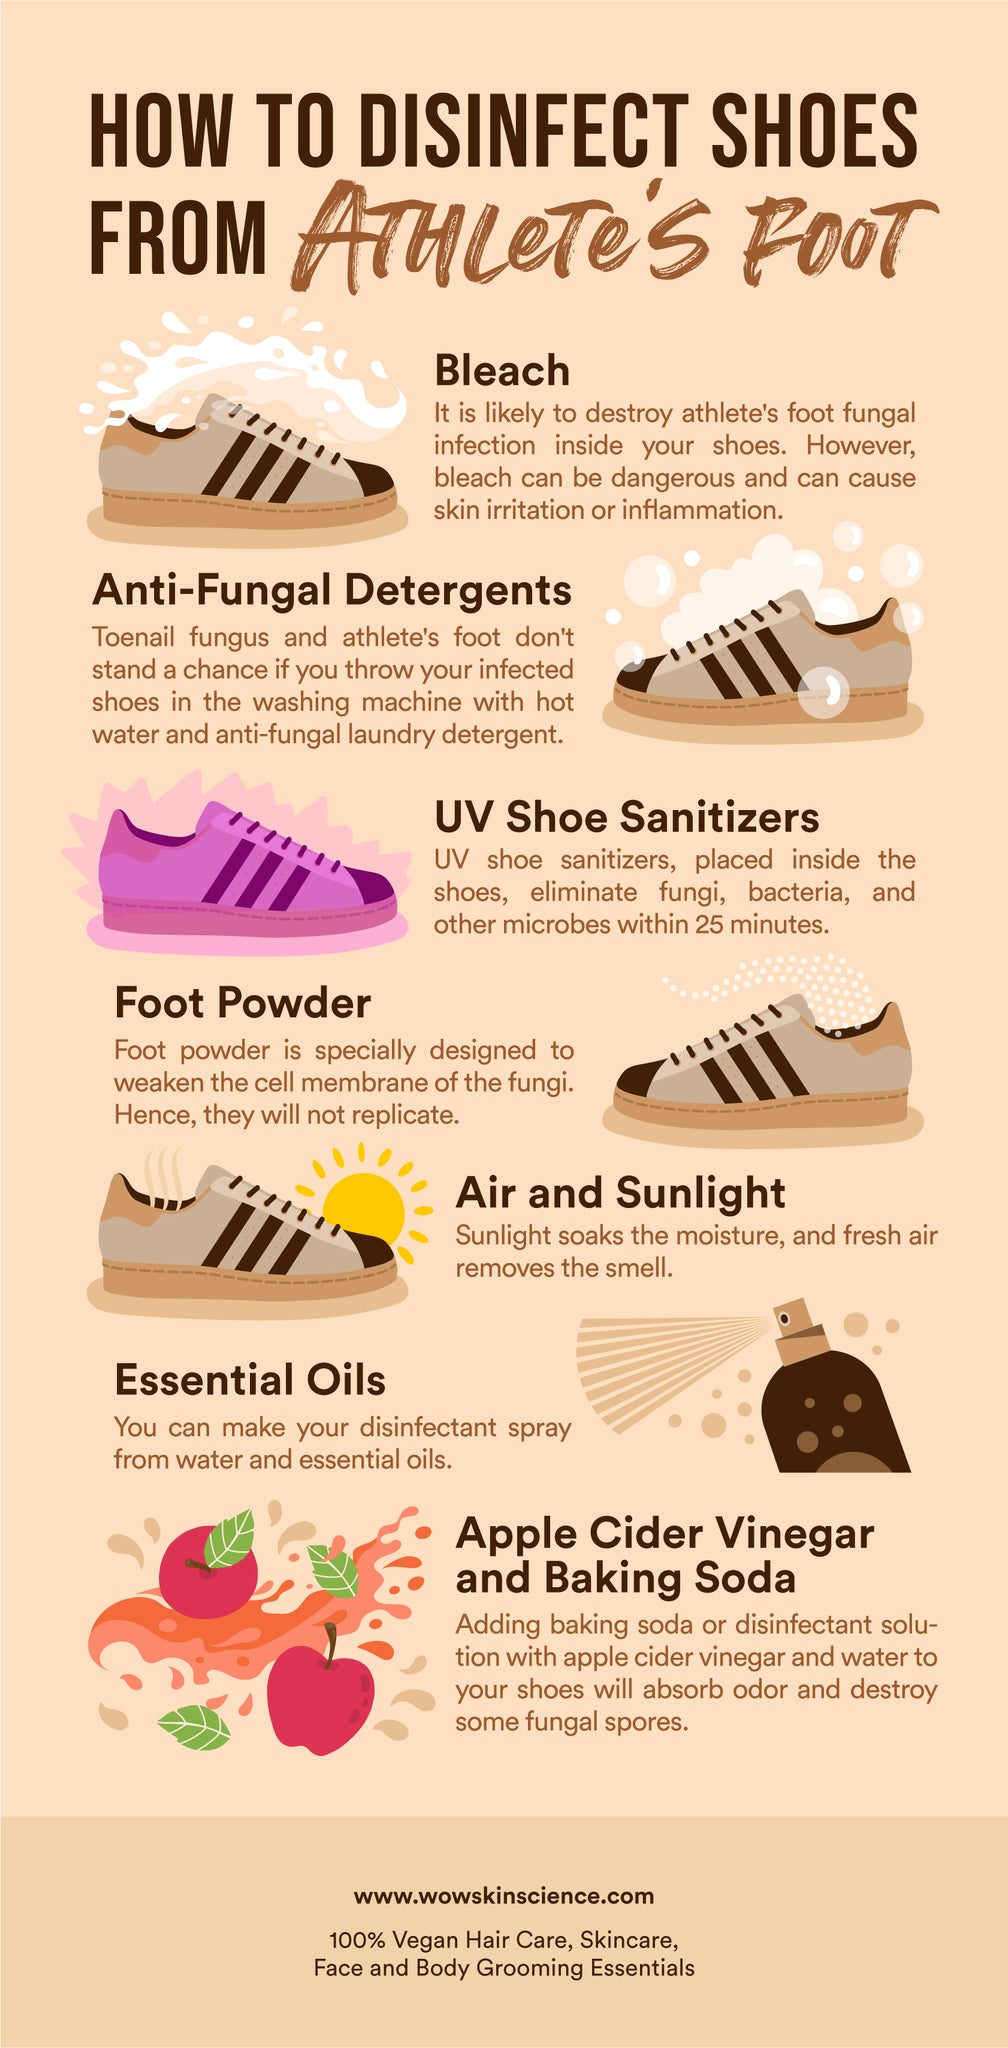 Discover how to disinfect shoes from athlete's foot!